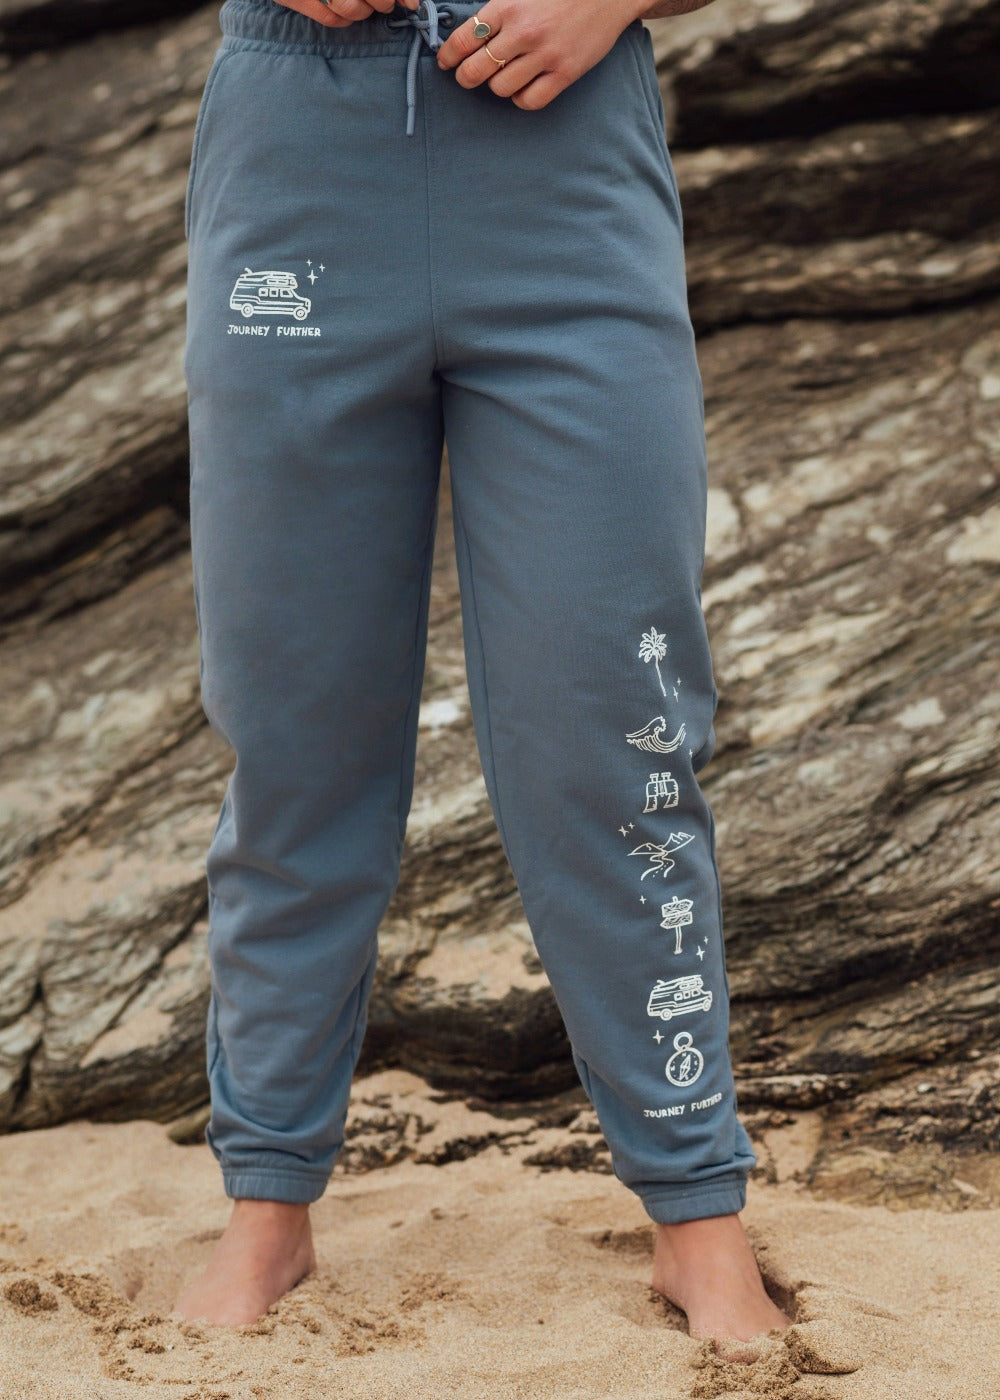 Journey Further Joggers by SurfGirl